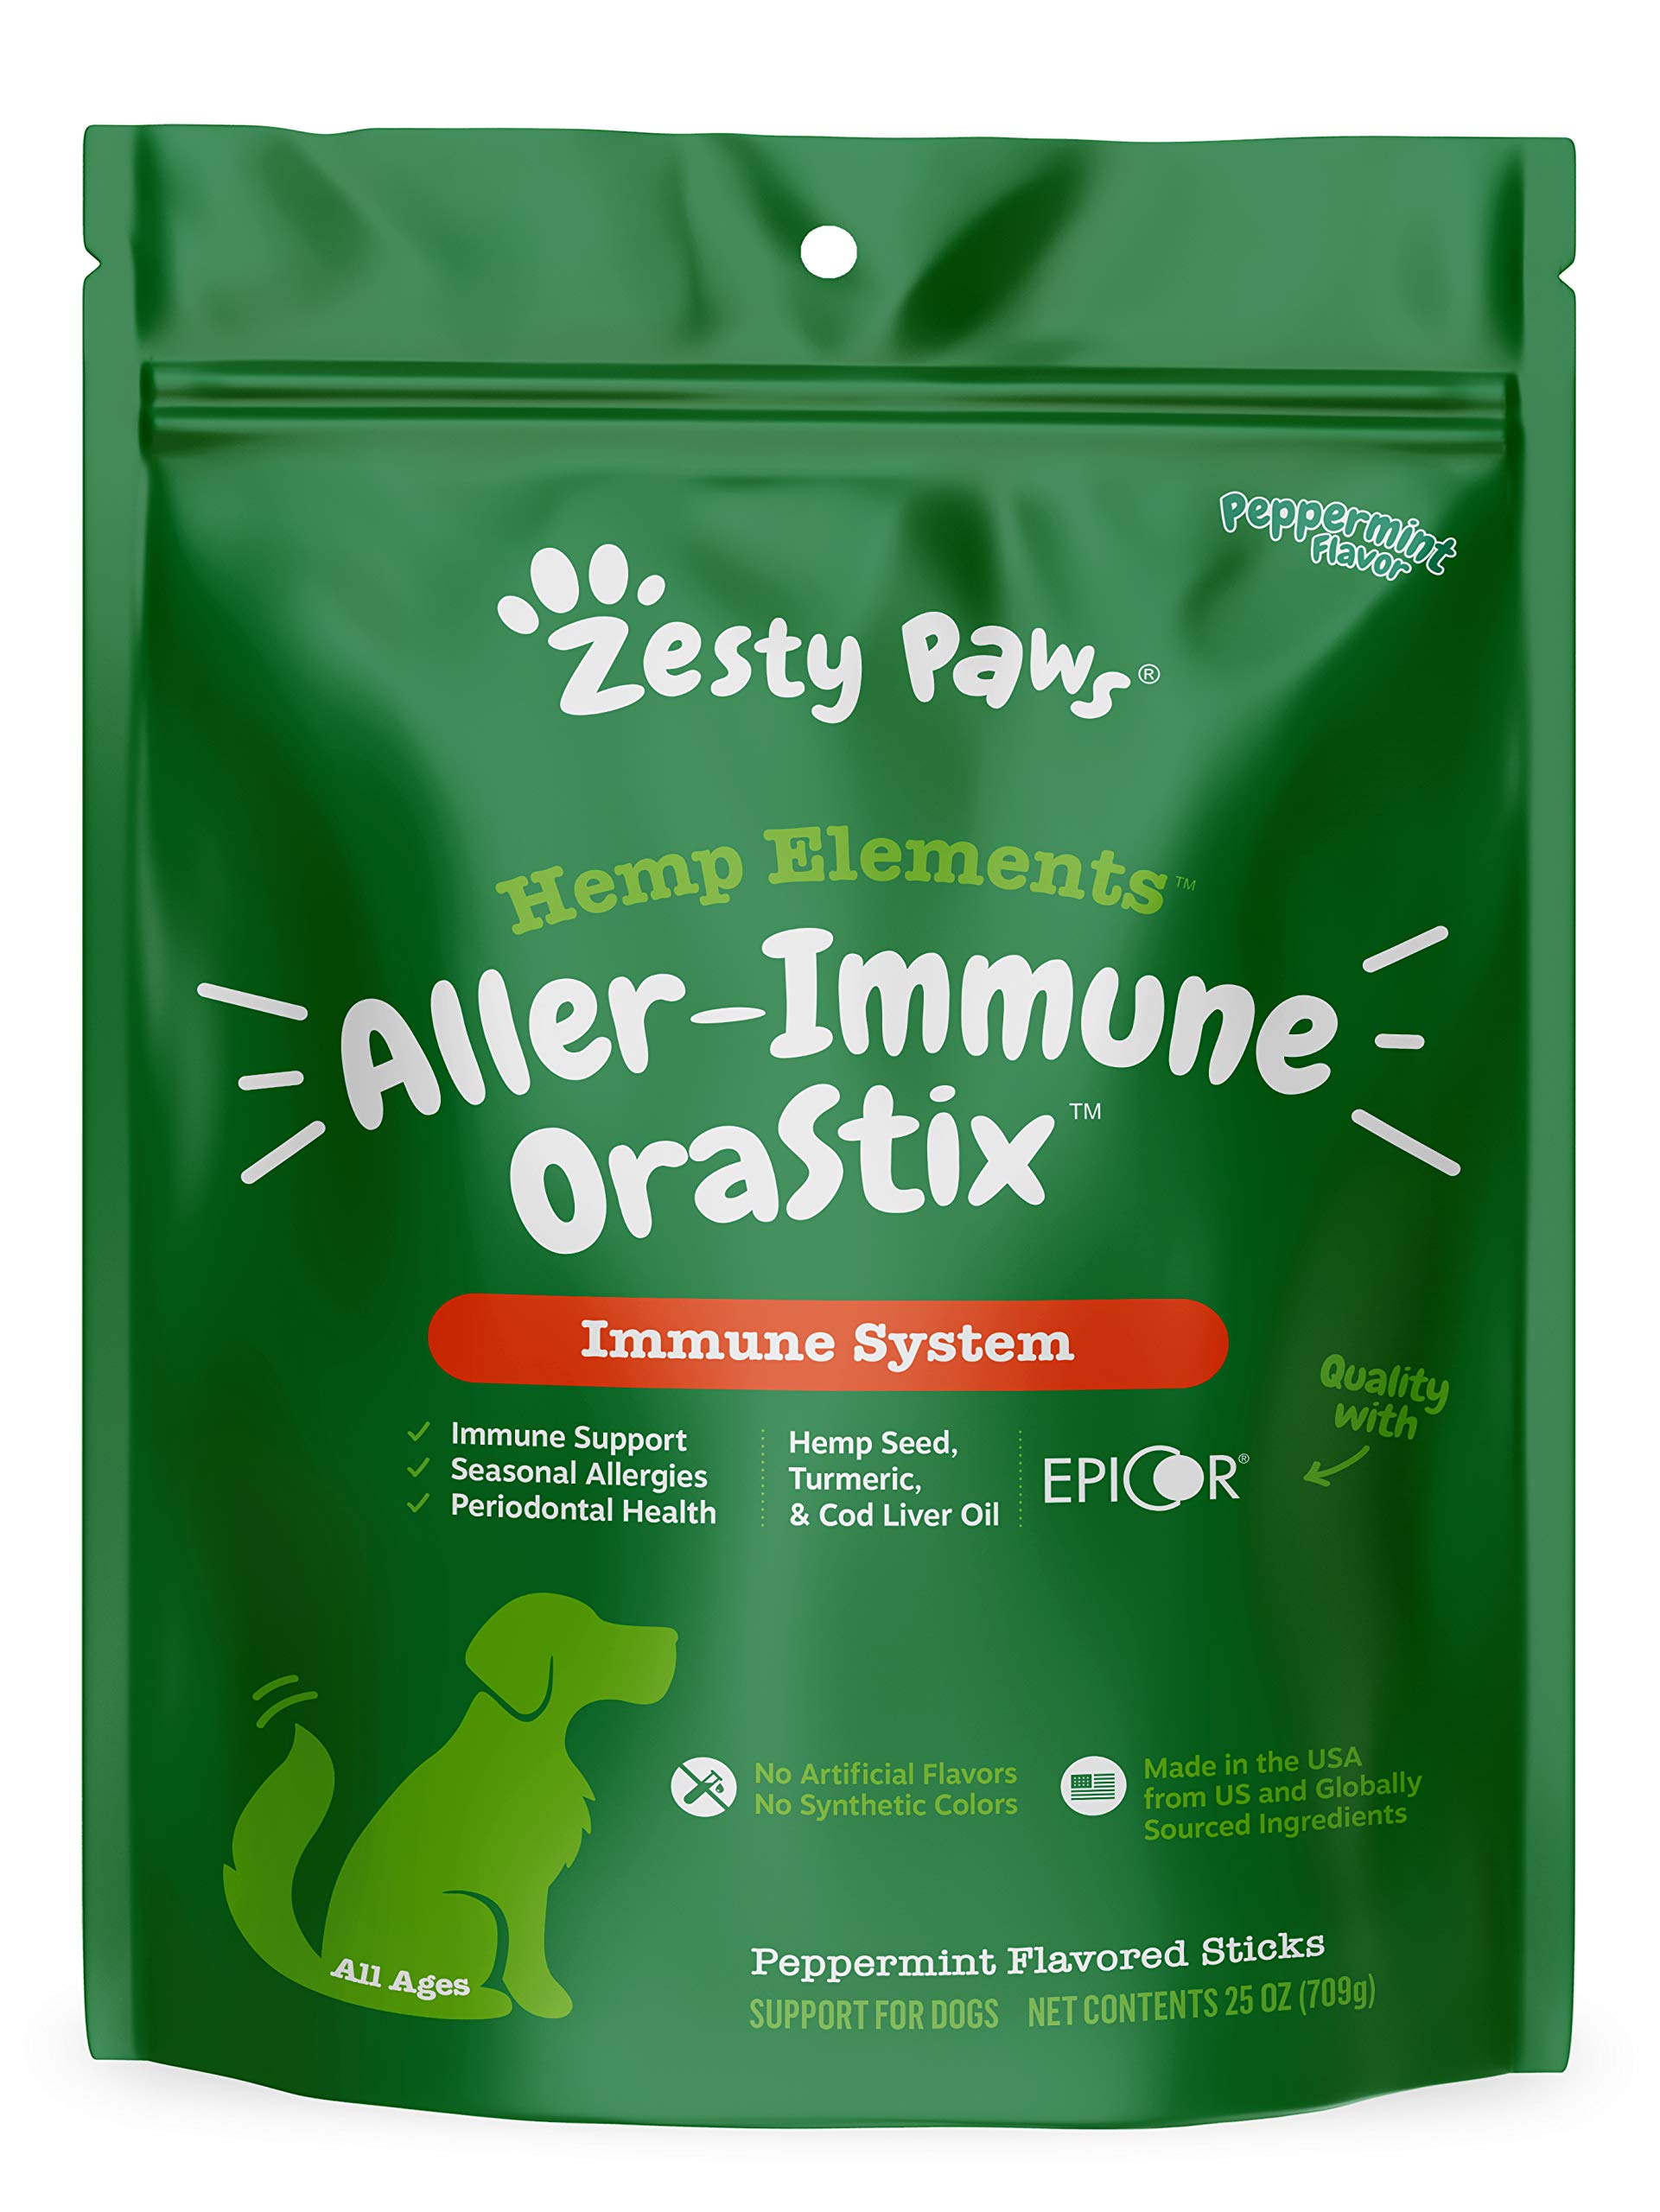 Zesty Paws OraStix for Dogs - Aller-Immune Sticks with Hemp Seed Turmeric Epicor Fish Oil Supports Immune Function Seasonal Alle